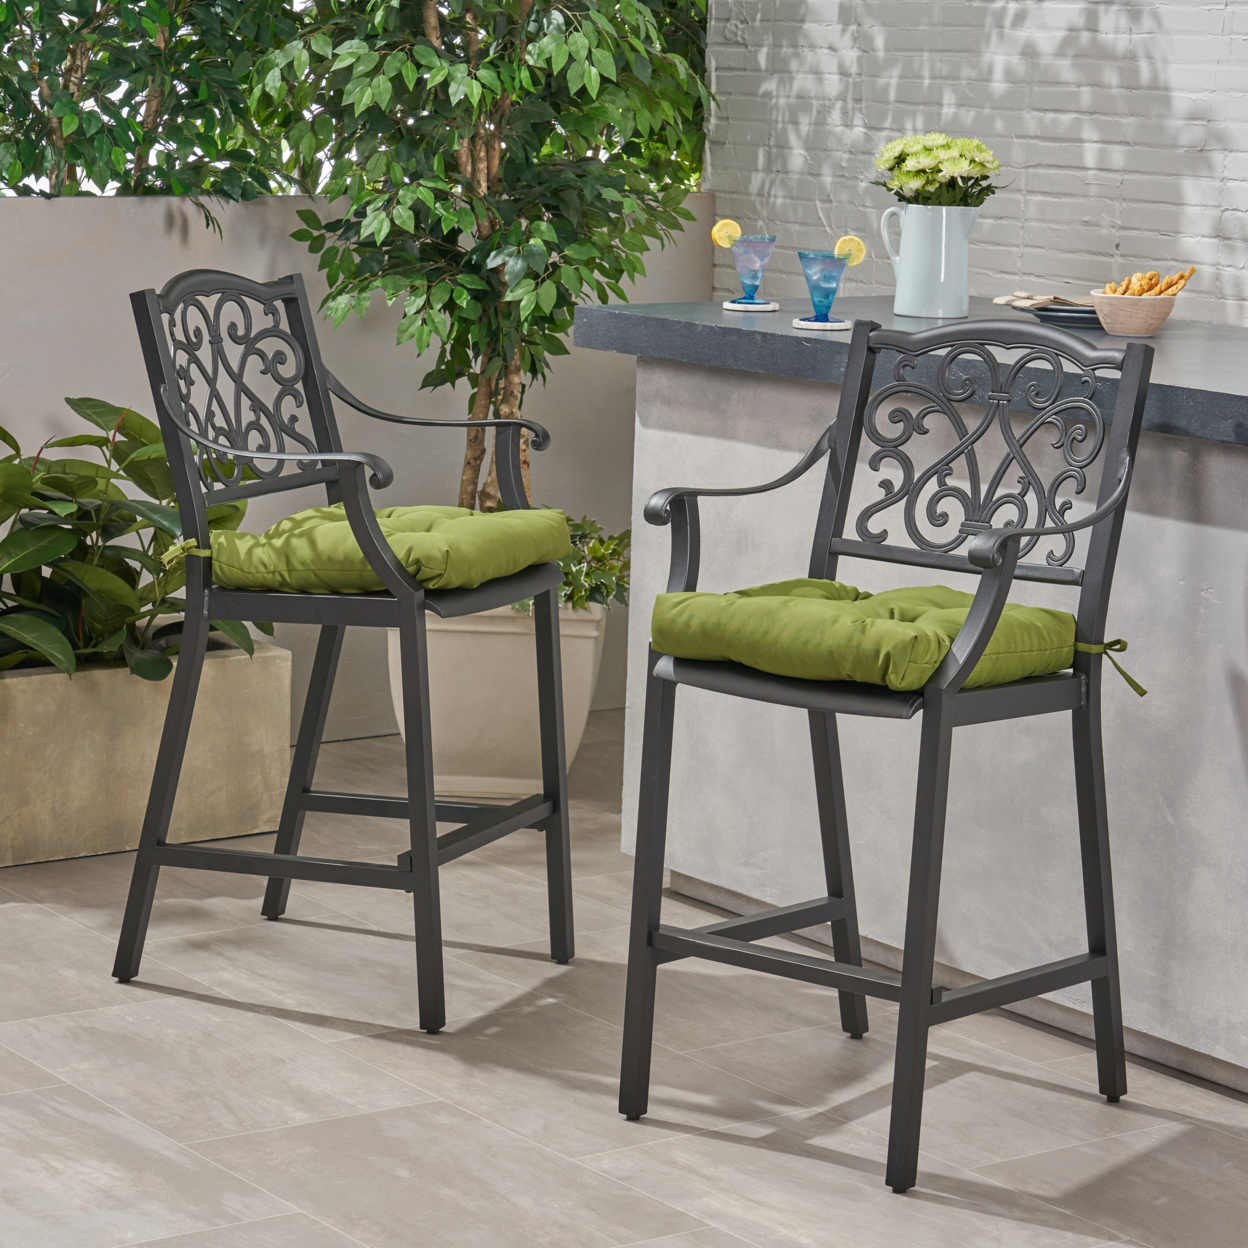 Roberta Outdoor Barstool With Cushion (Set Of 2) Antique Matte Black And Charcoal - Antique Matte Black + Charcoal